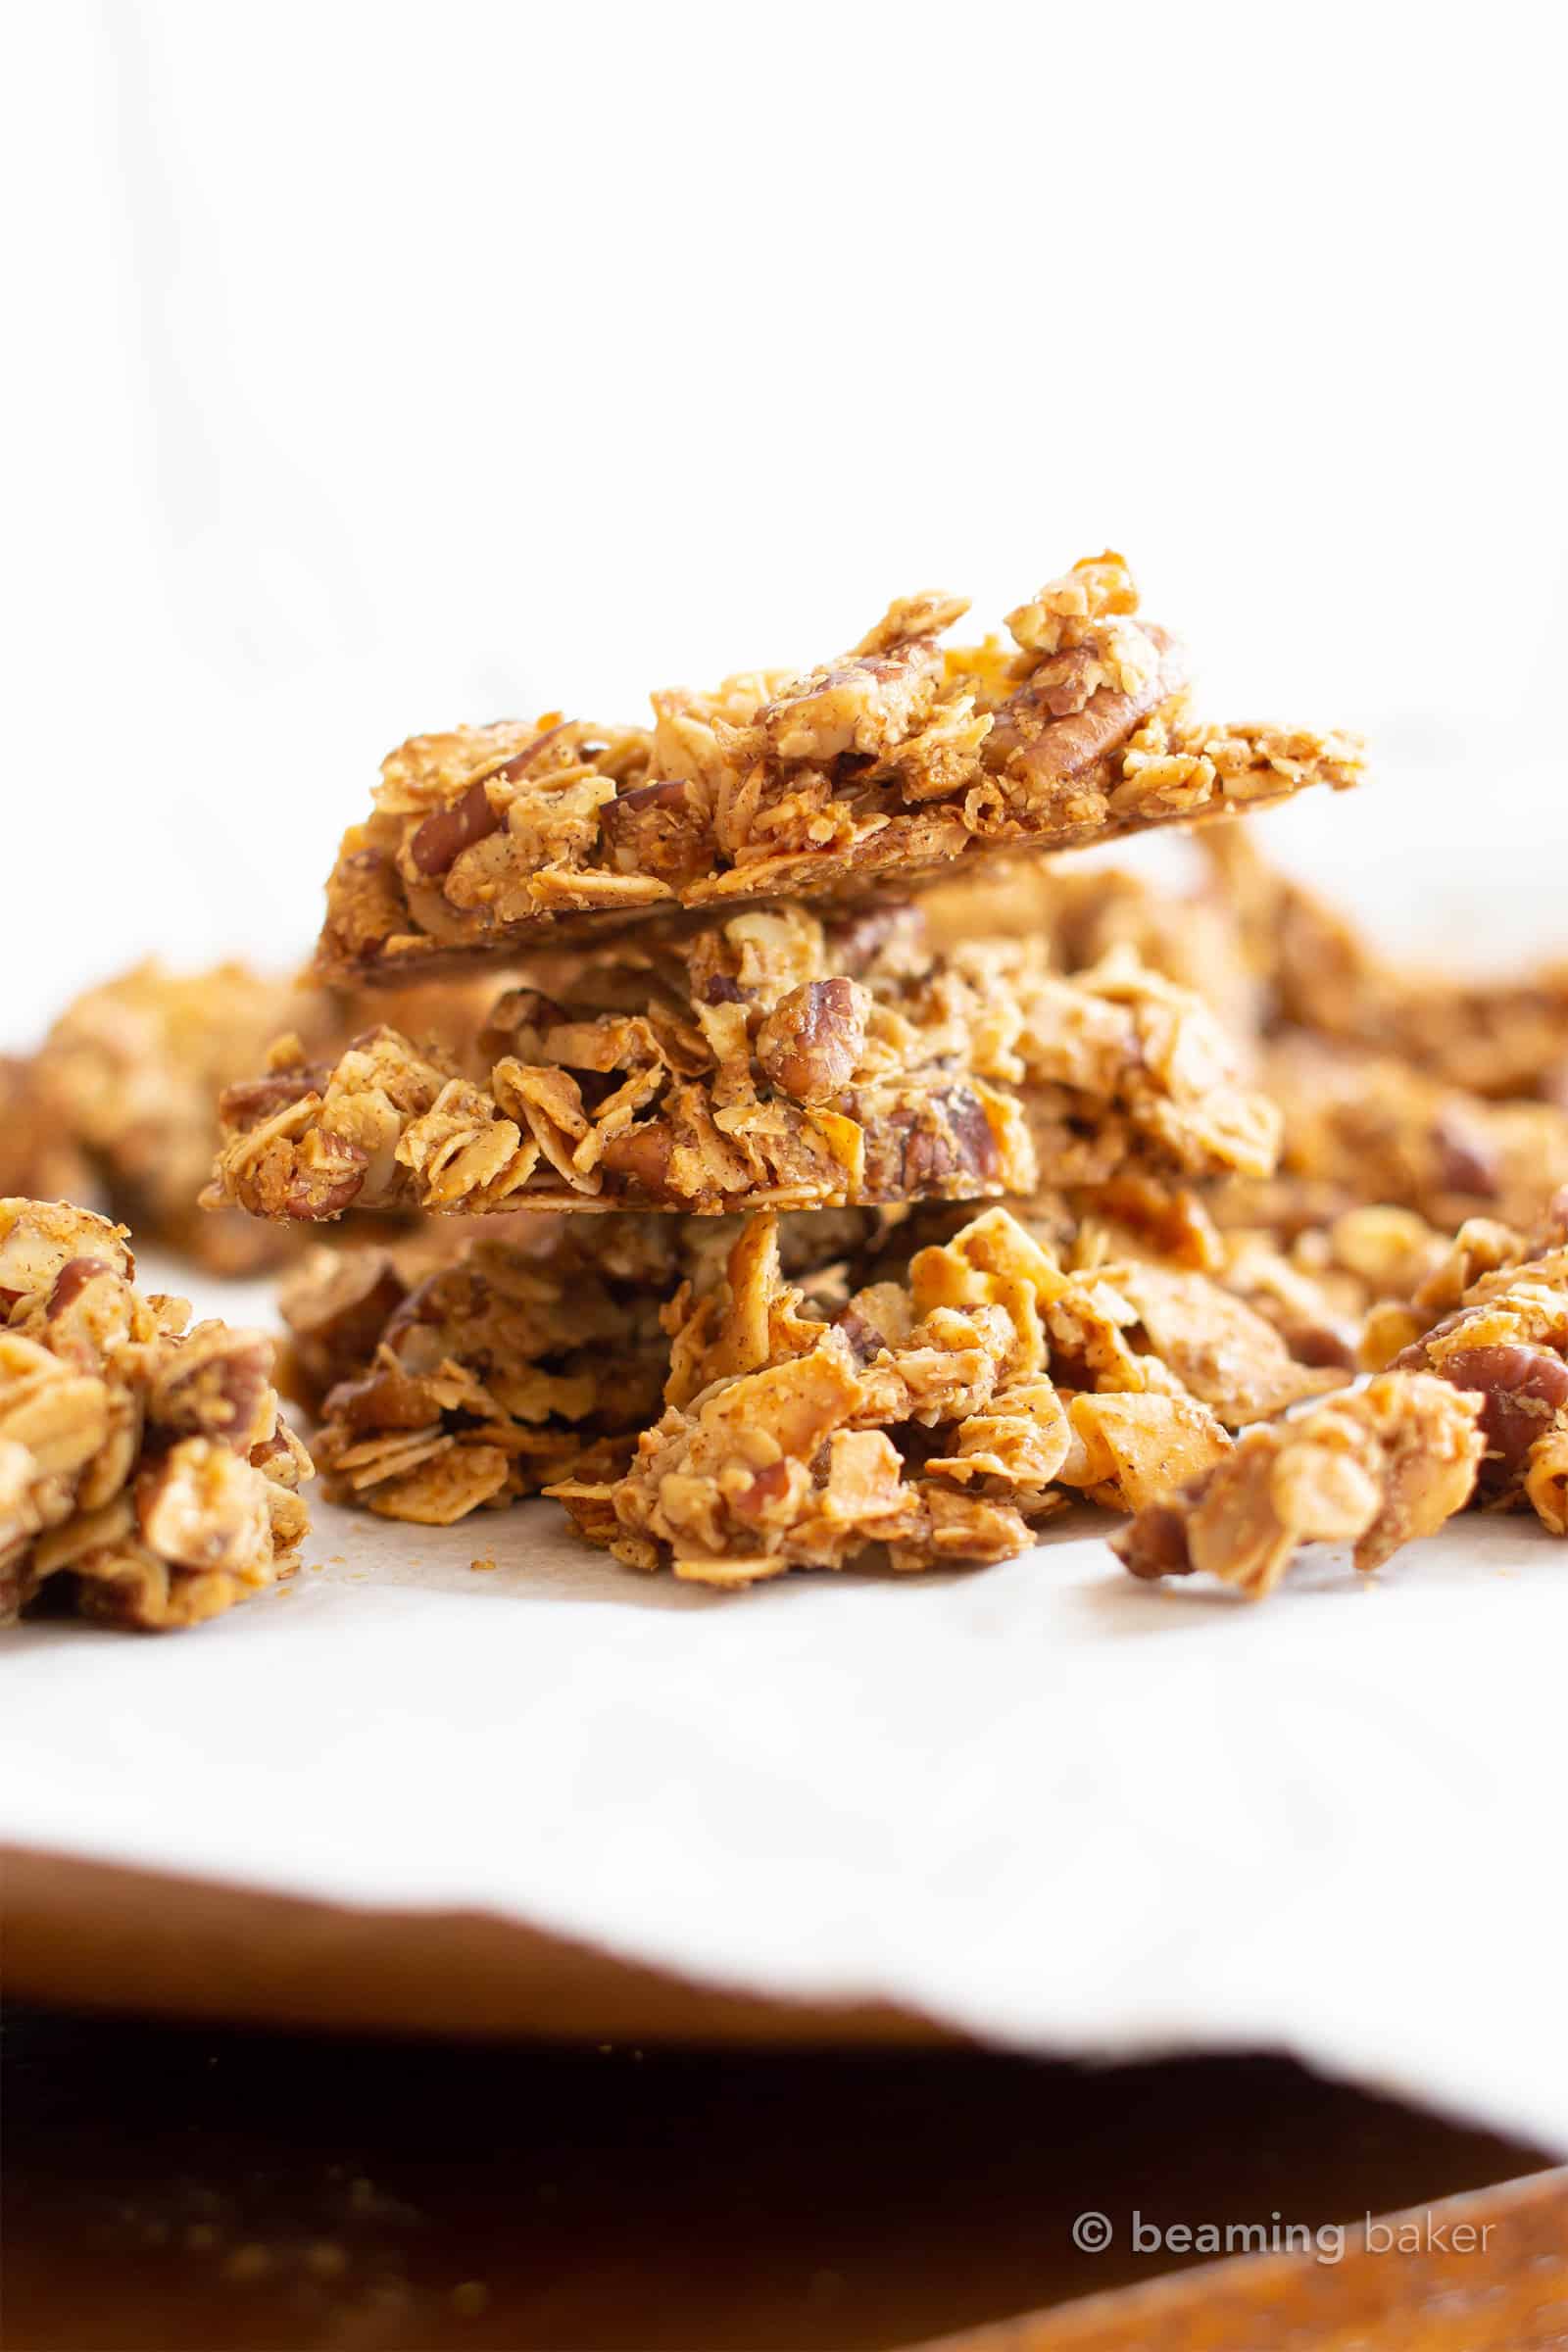 Healthy Chunky Granola Recipe (GF): learn how to make chunky granola with clusters! The best homemade chunky granola—vegan, gluten free & yummy! Super CHUNKY clusters with crispy edges, packed full of nuts & nutrients! #Granola #Vegan #GlutenFree #Healthy | Recipe at BeamingBaker.com